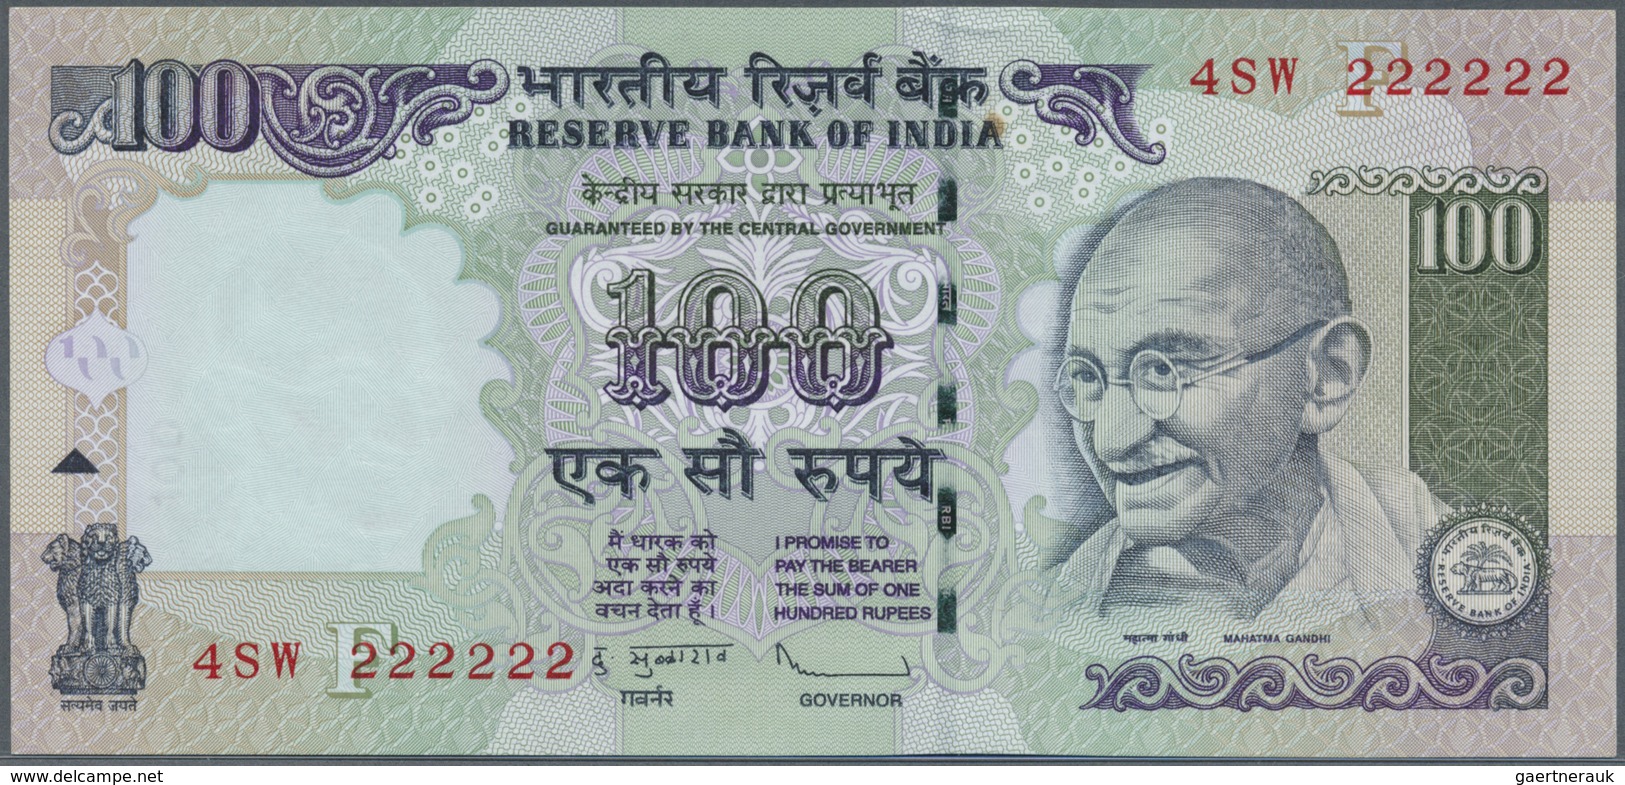 India / Indien: et of 10 notes 100 Rupees 2009 P. 98 all with interesting serial number containing: